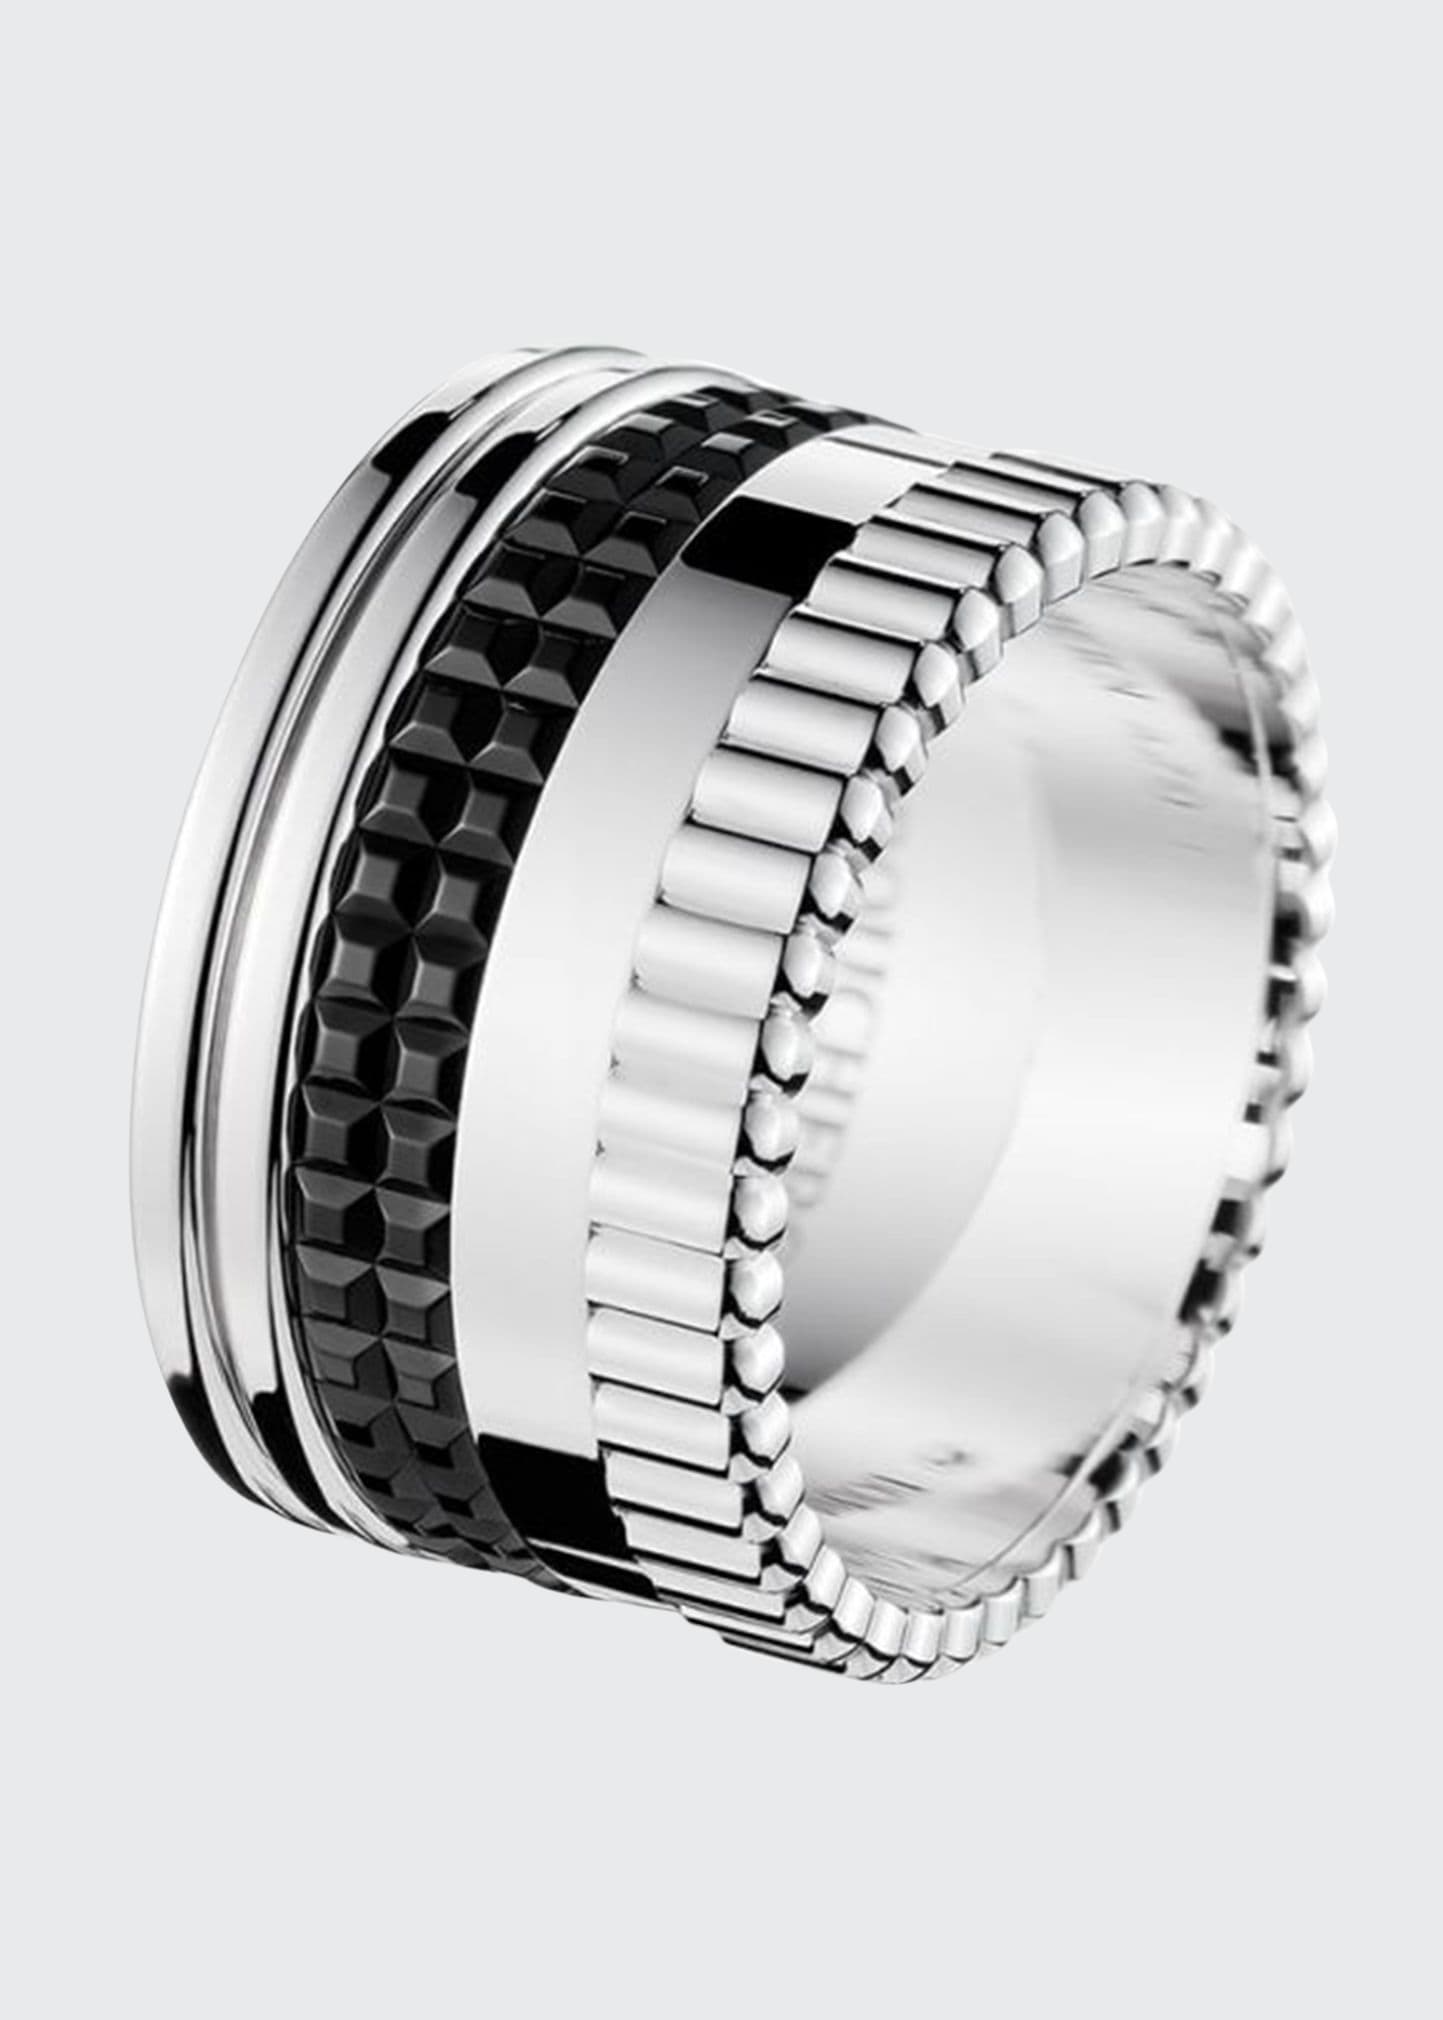 Boucheron Quatre Large Ring in White Gold with Black PVD, Size 54